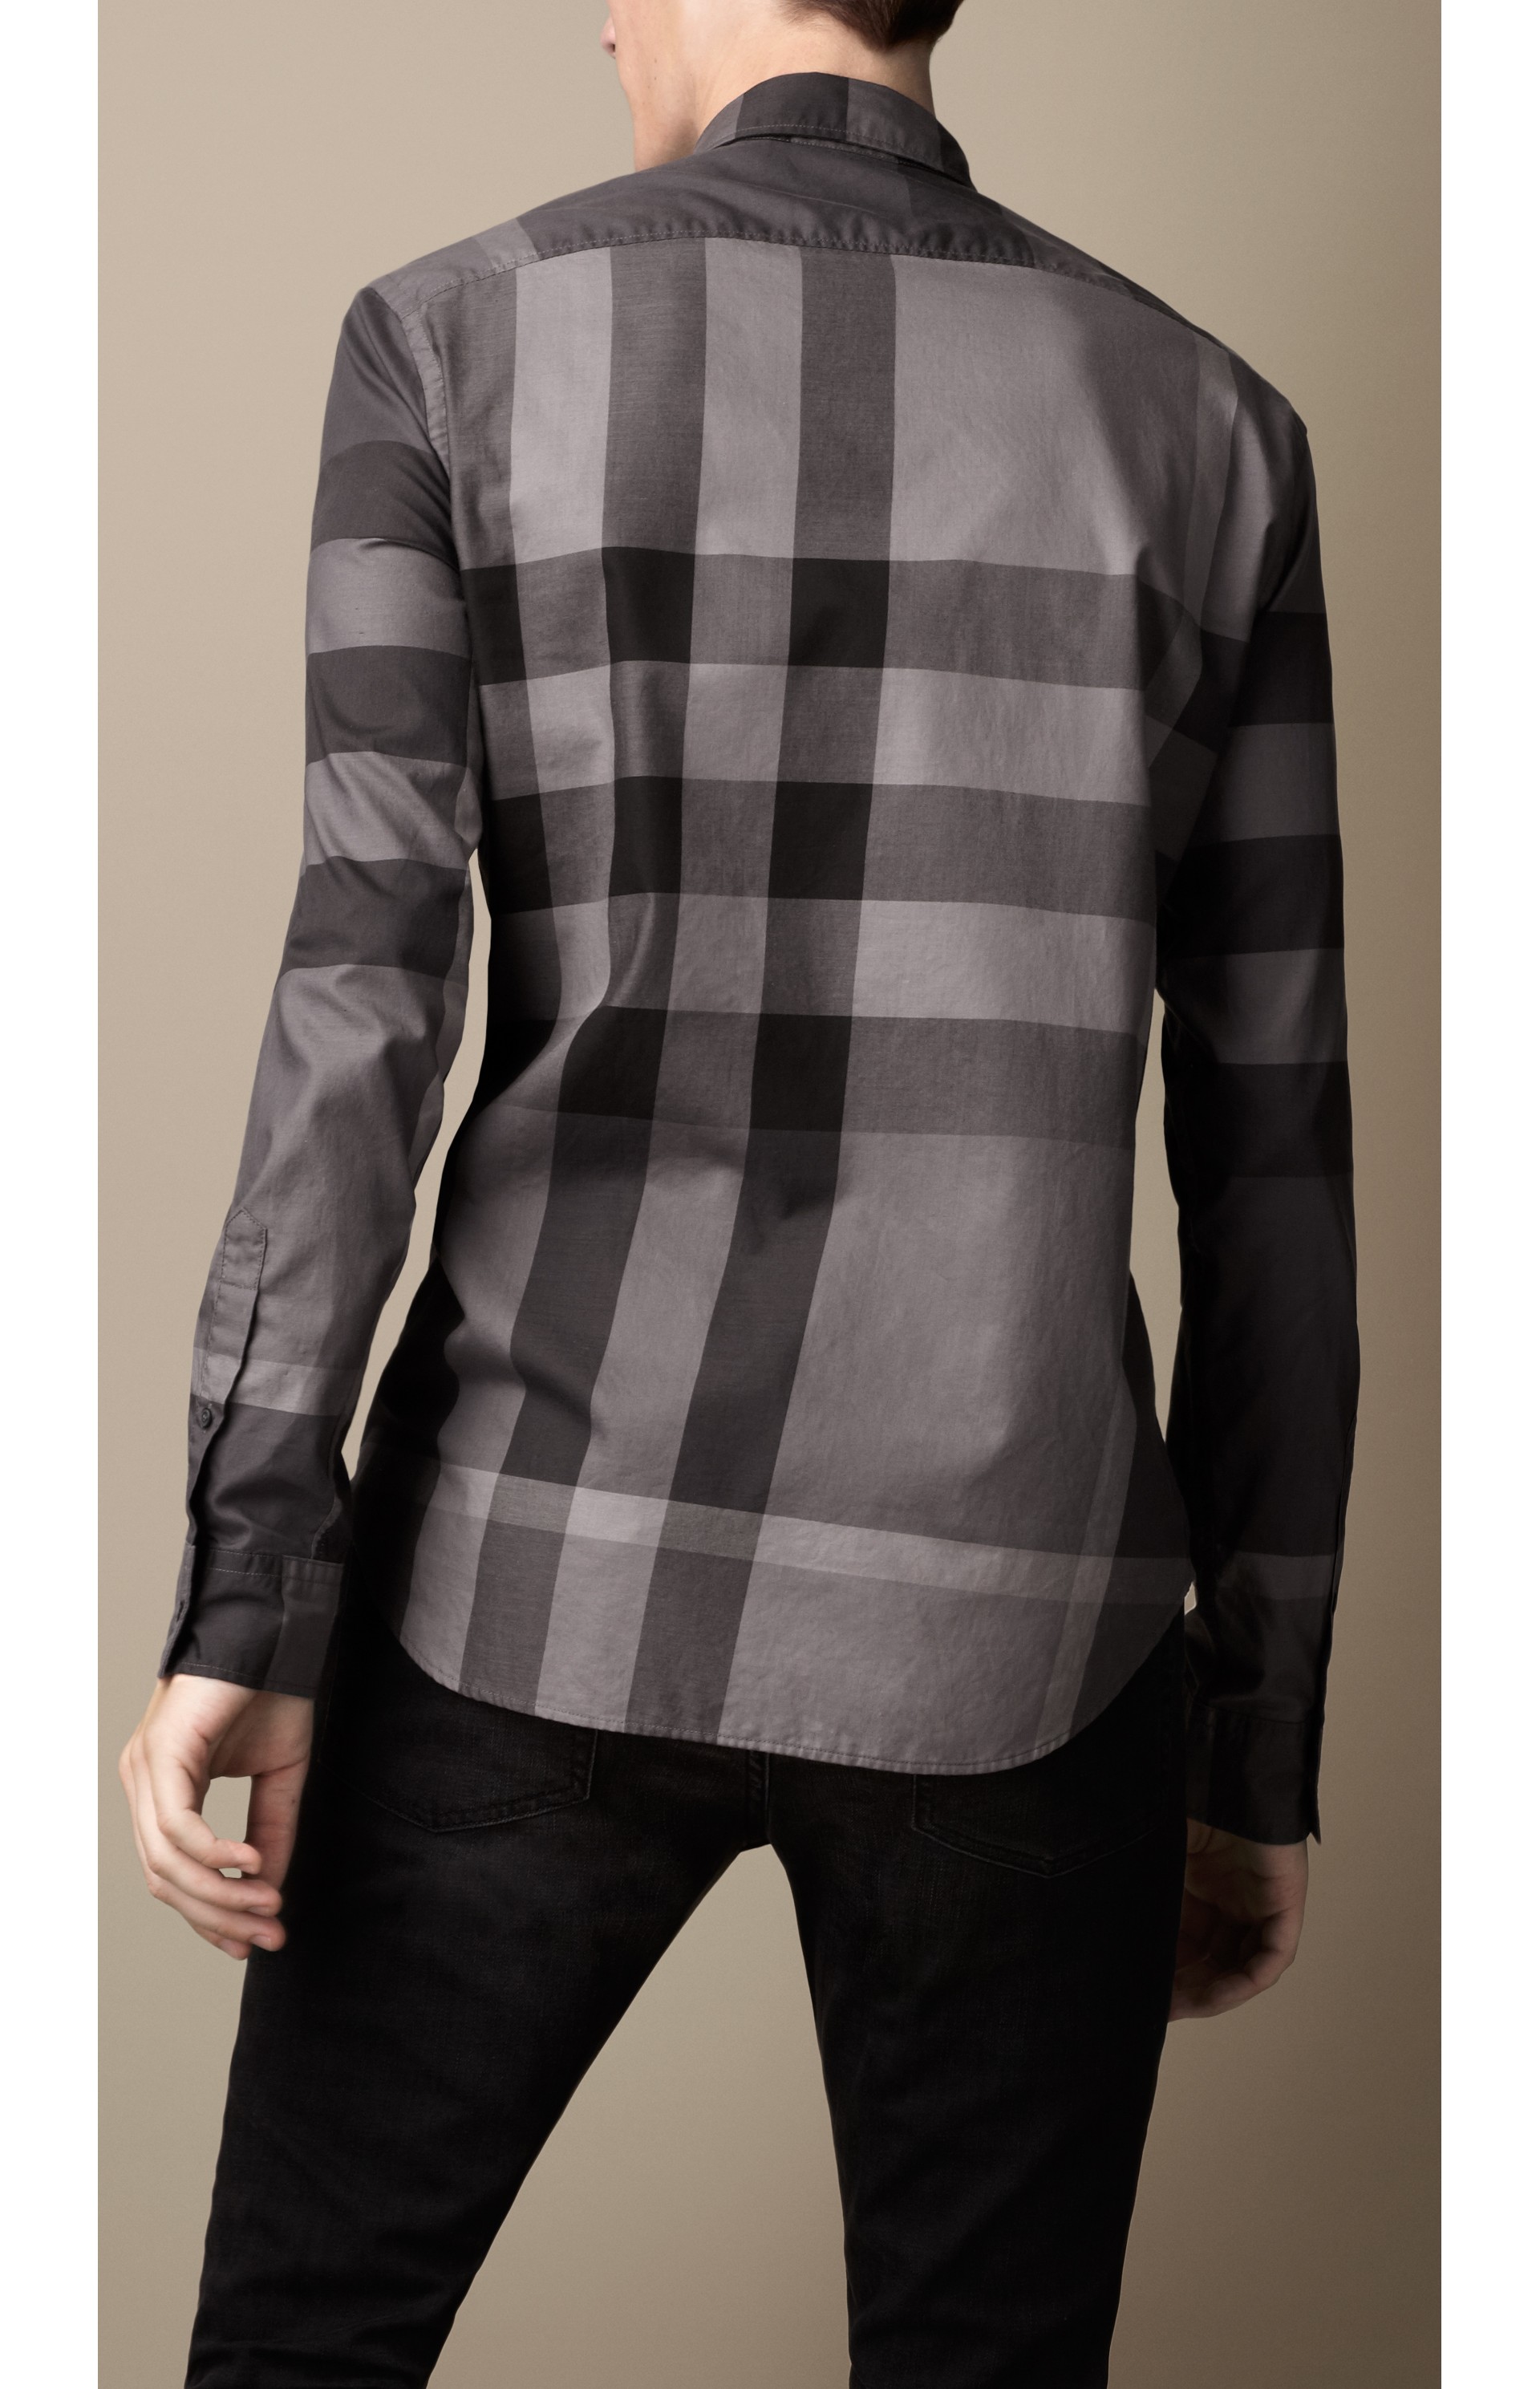 Giant Exploded Check Cotton Shirt in Charcoal - Men | Burberry United ...